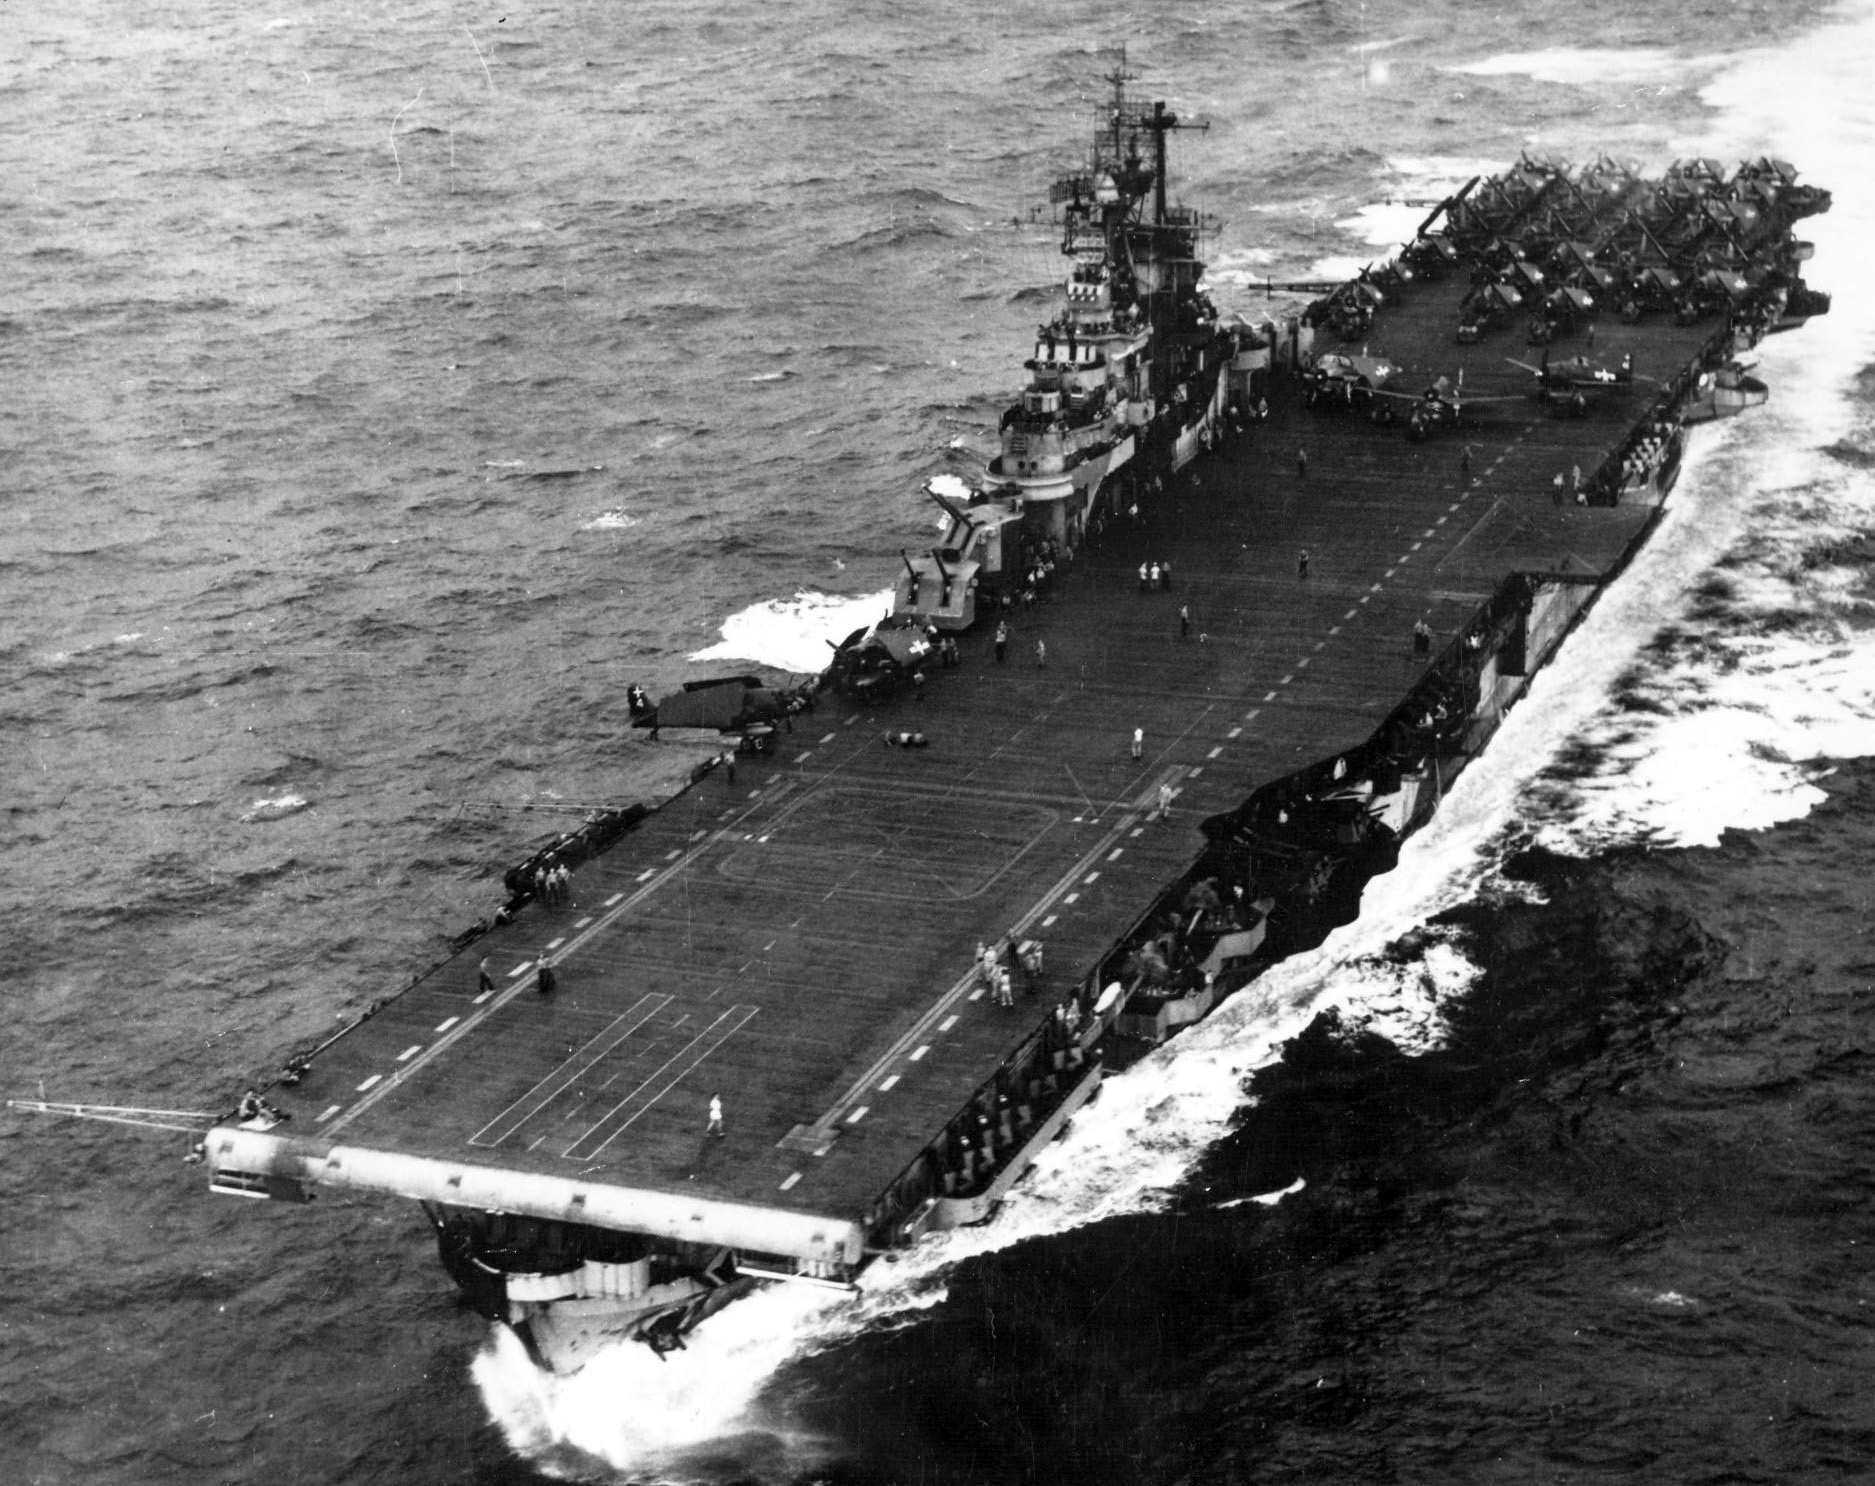 Intrepid in the Philippine Sea, Nov 1944, with F6F Hellcat fighters on her flight deck